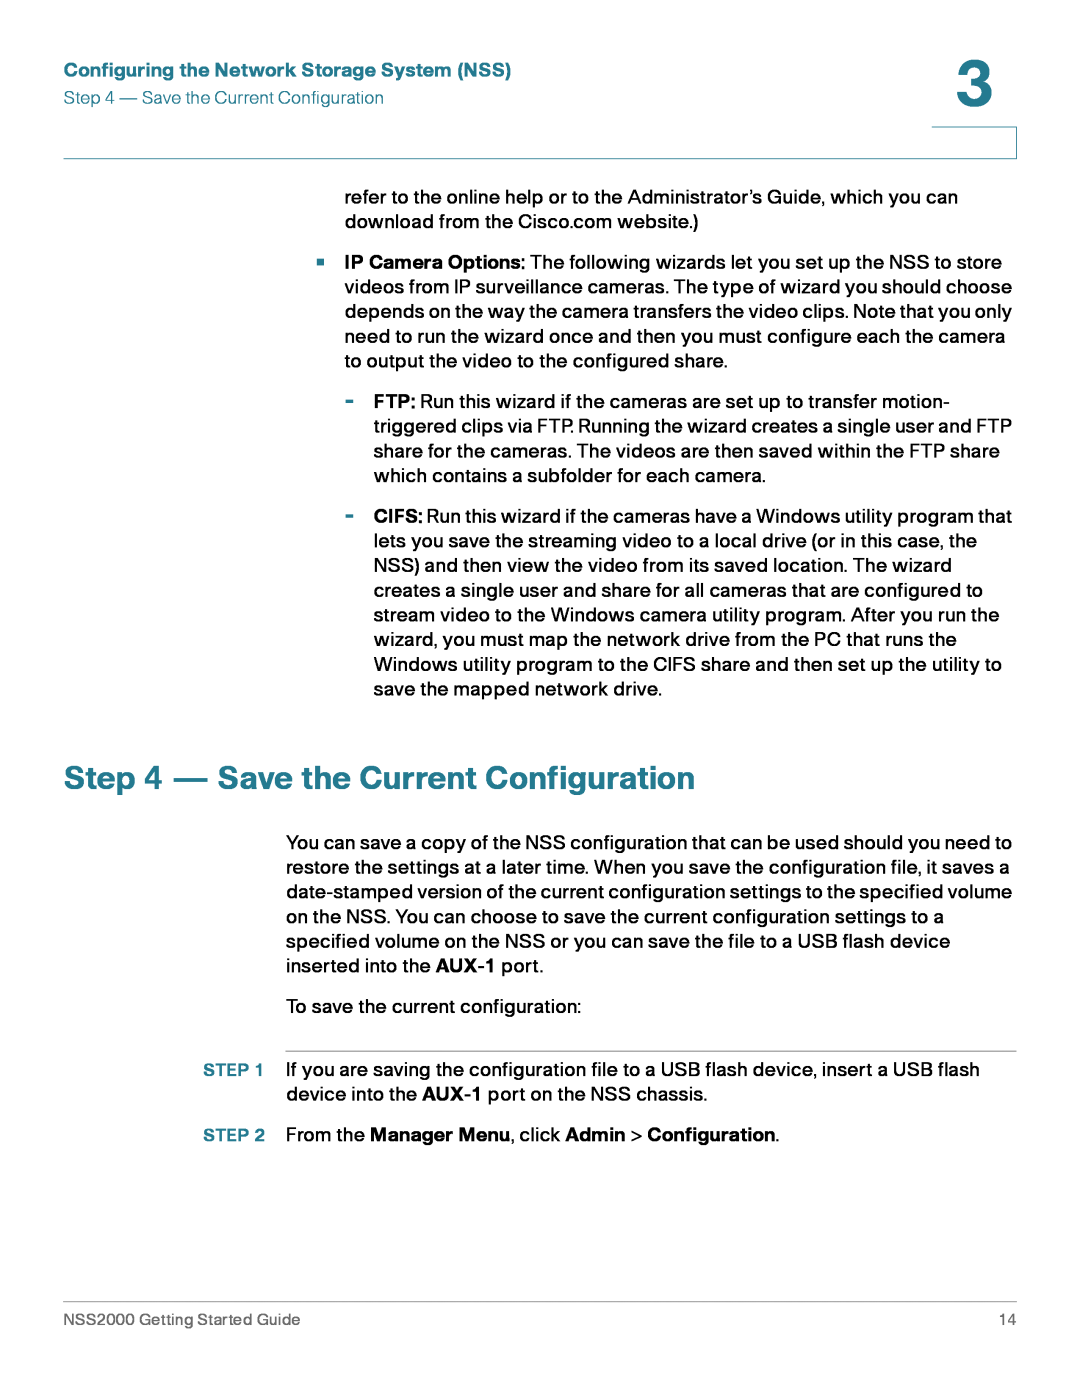 Cisco Systems NSS2000 Series manual Save the Current Configuration, Configuring the Network Storage System NSS 